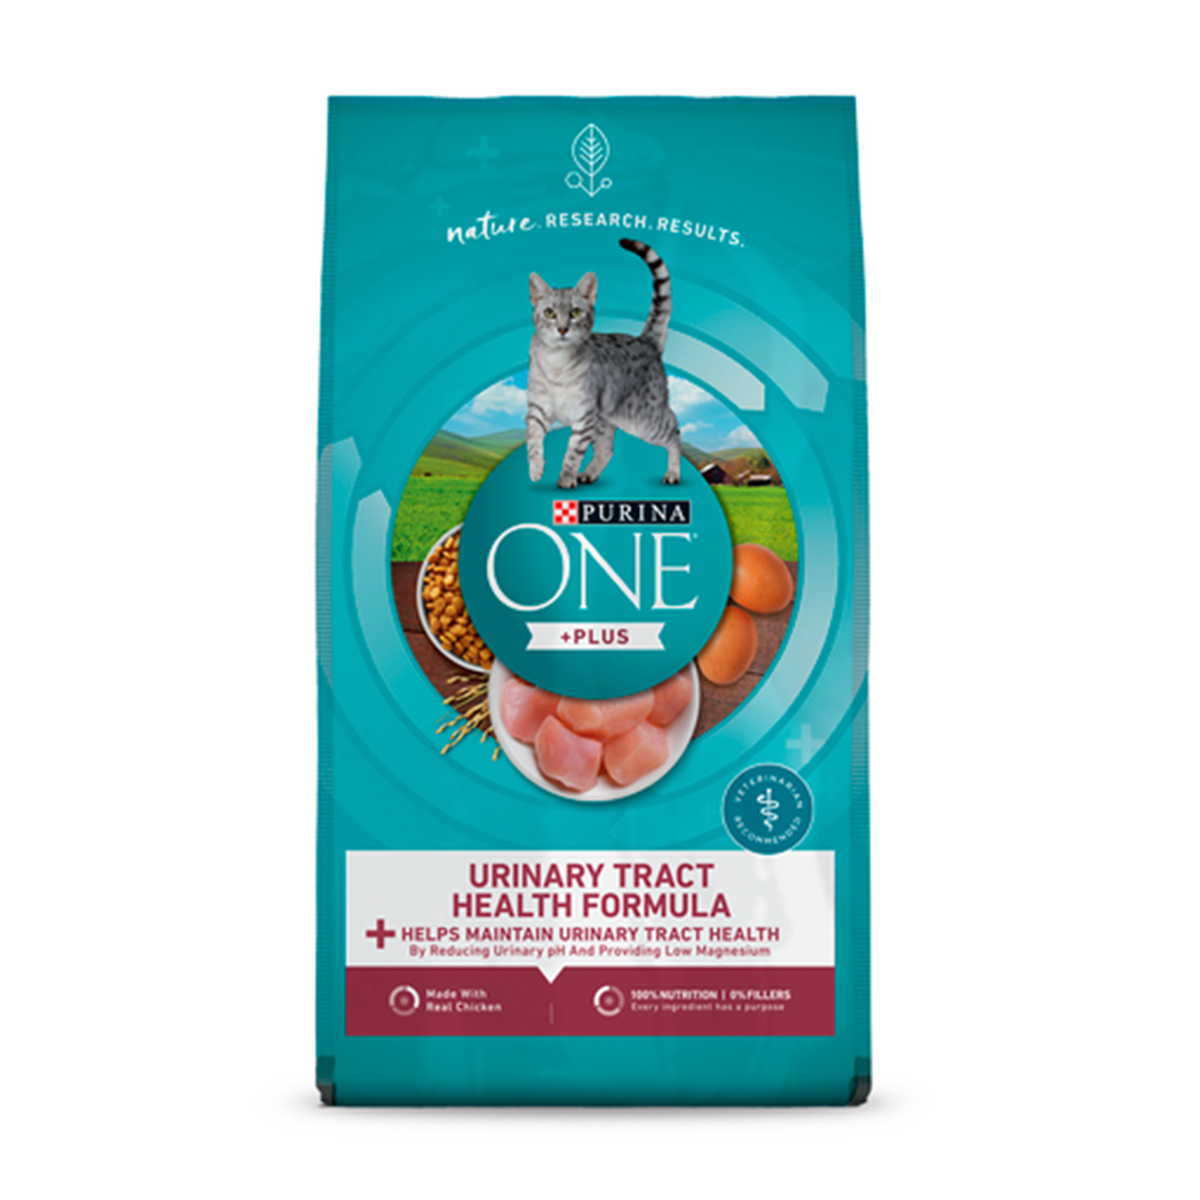 purina-one-dry-urinary-tract-cat-food.png